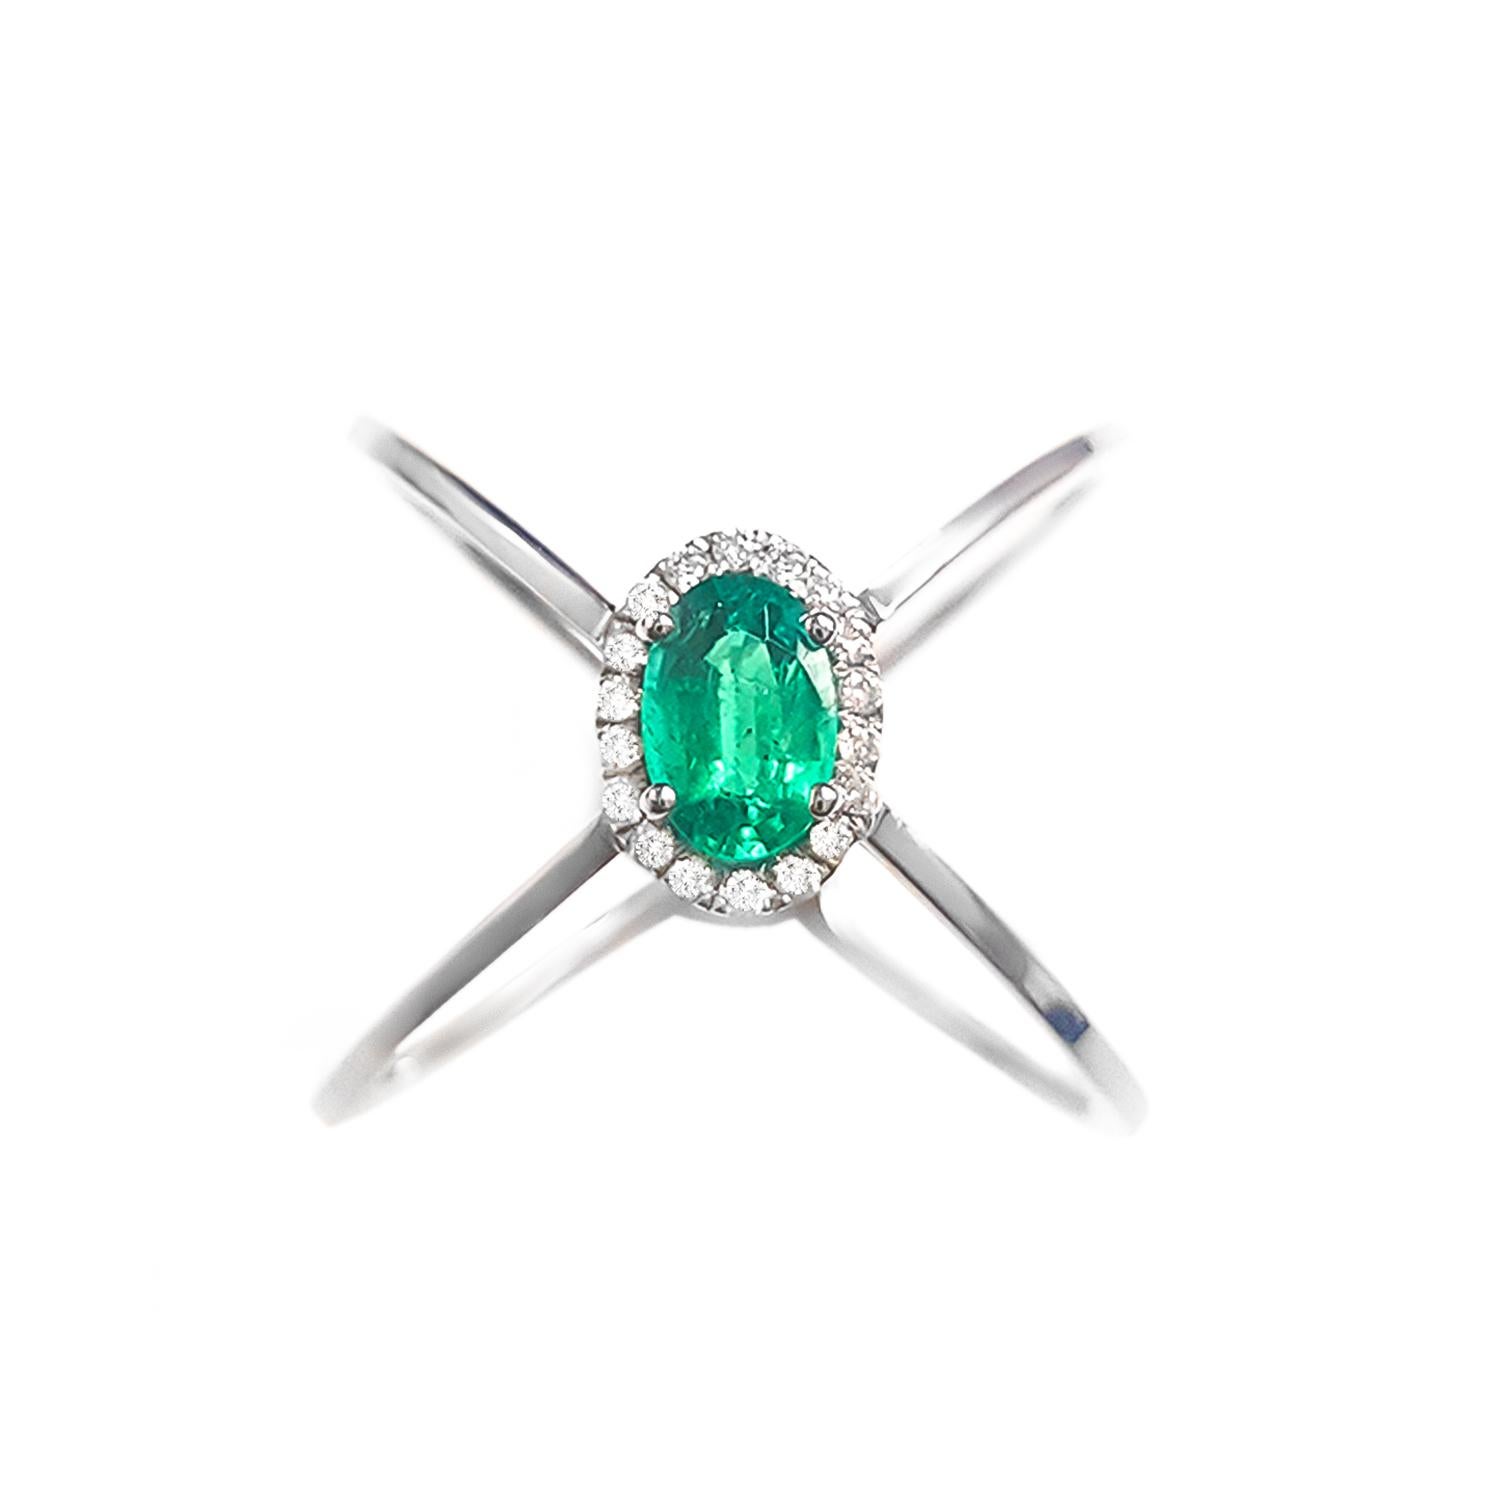 This ladies 14k white gold oval emerald and diamond ring has 0.54ct oval emerald and 0.09ct round diamonds.Fun ring for everyday use. very comfortable. 
